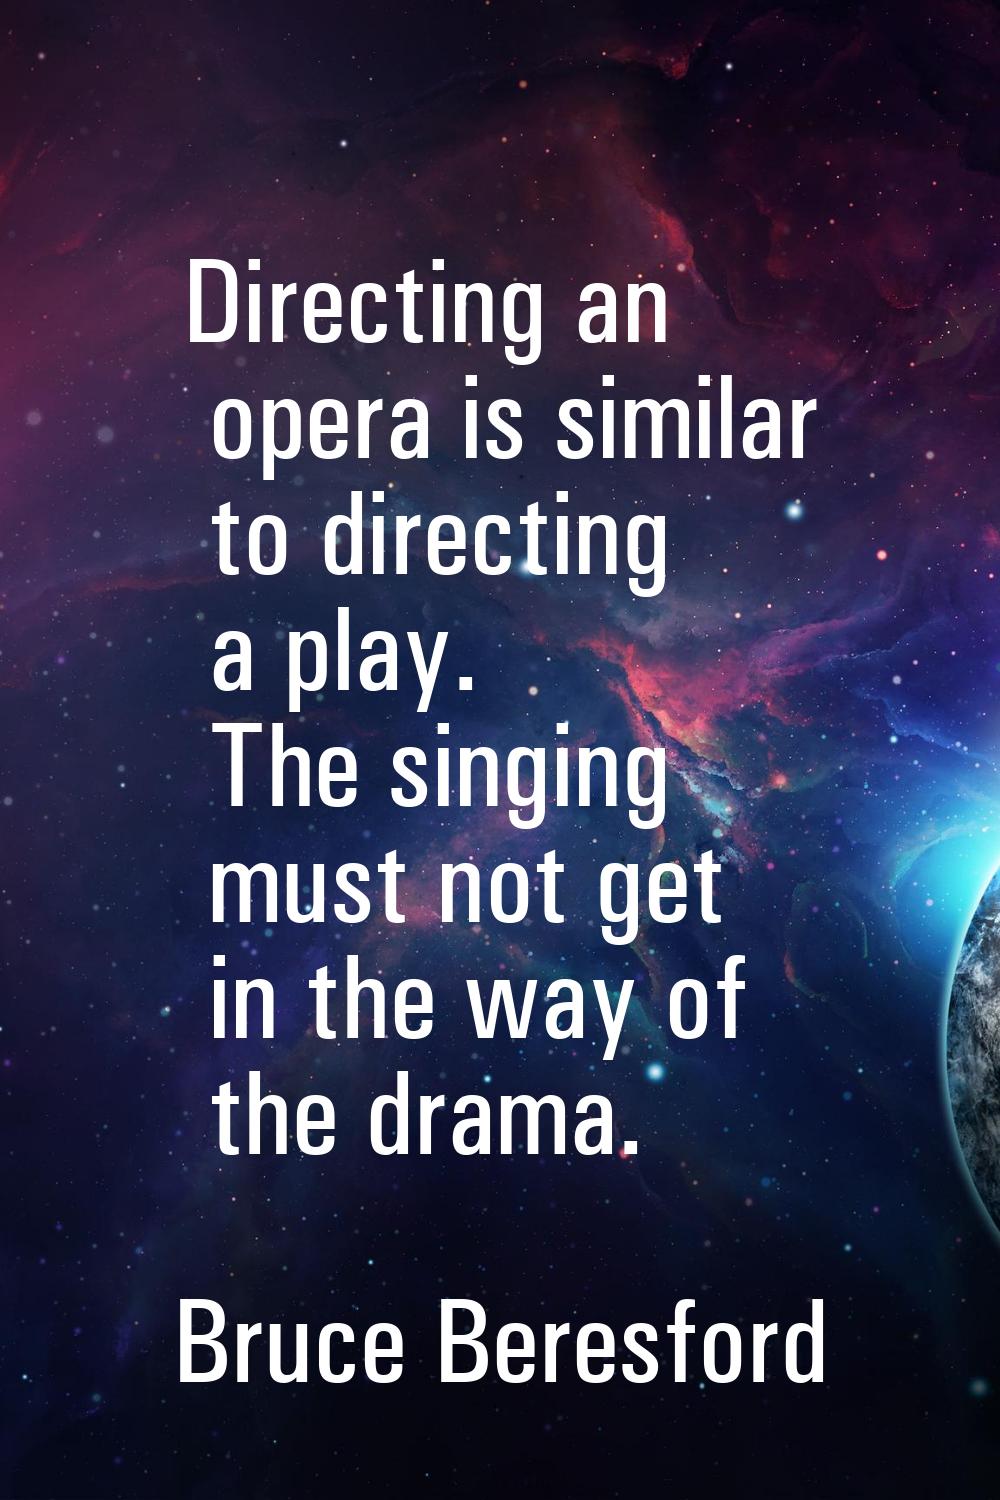 Directing an opera is similar to directing a play. The singing must not get in the way of the drama